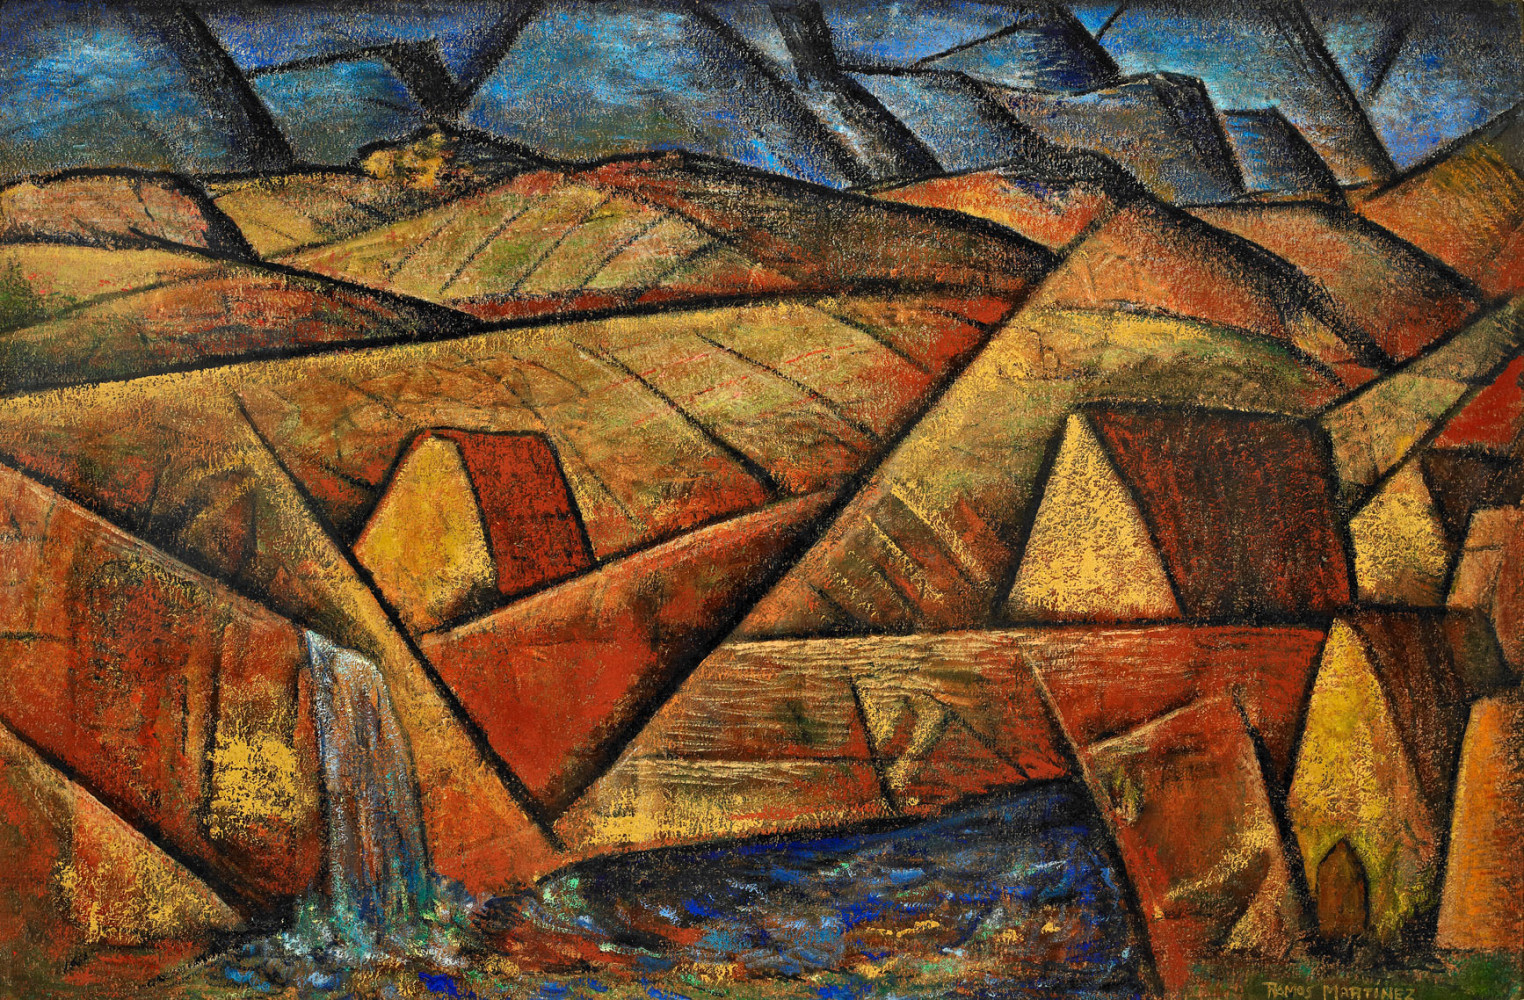 Lomas y Montanas, 1940 	oil on board 	23 3/4 x 35 7/8 inches;  60 x 91 centimeters 	LSFA# 13311